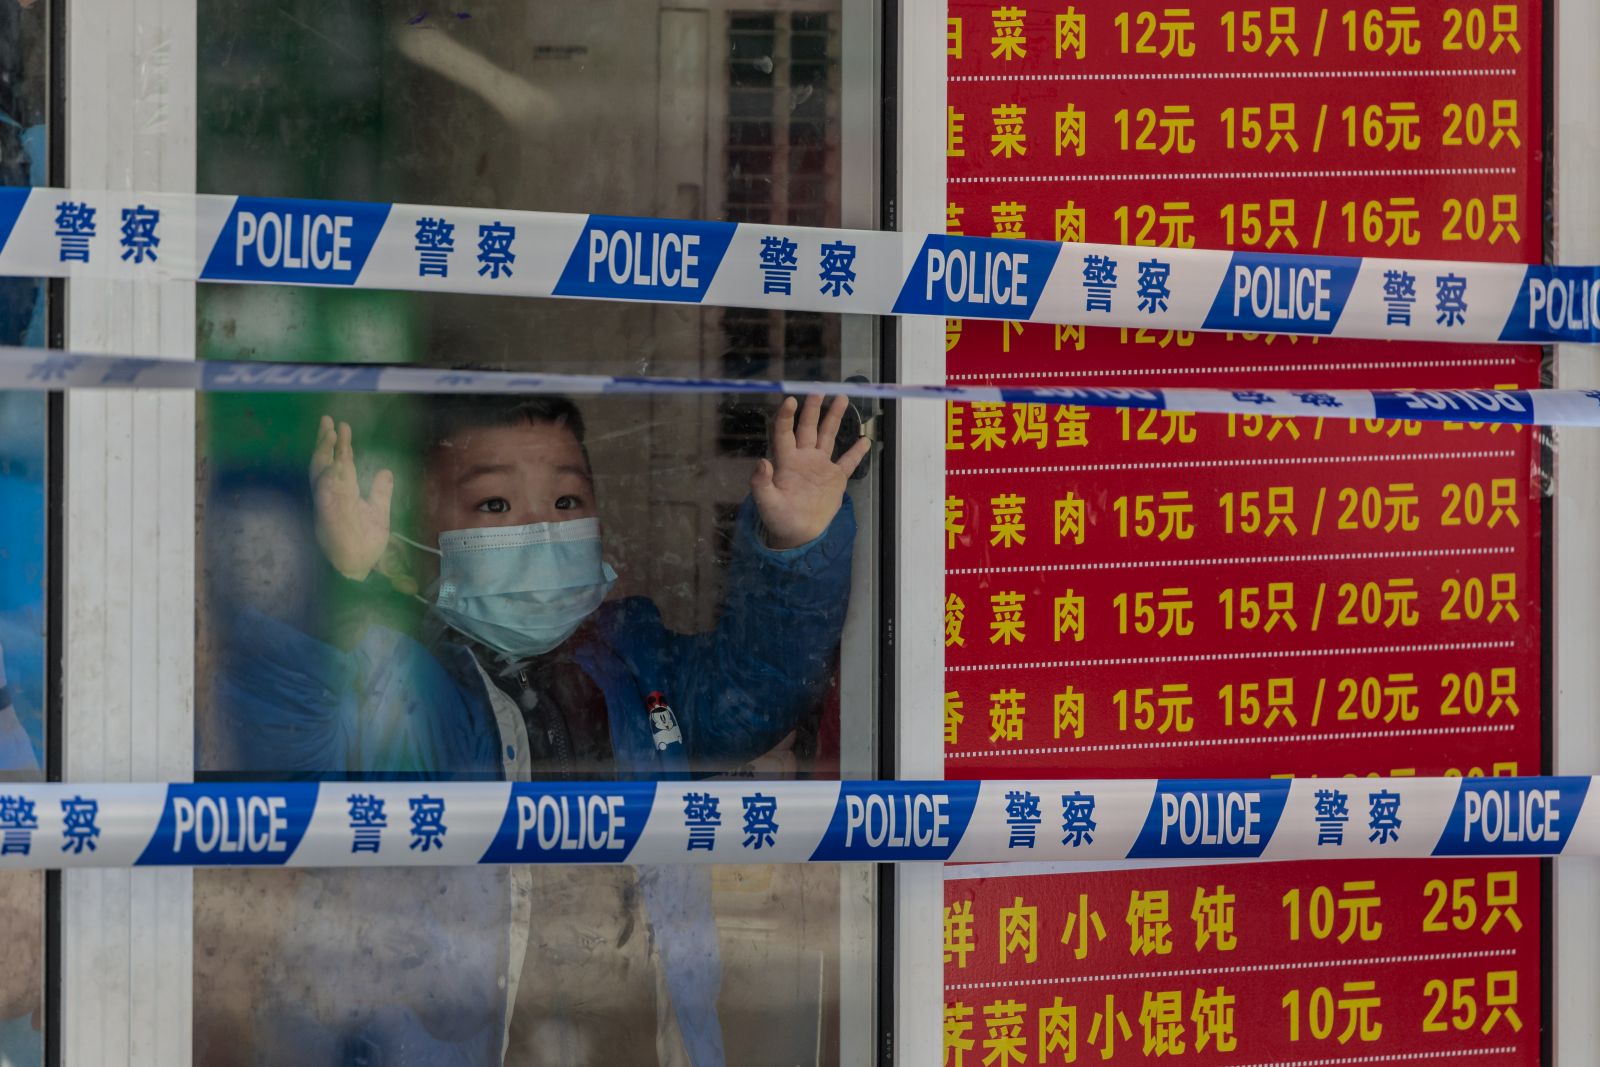 epa09857430 A quarantined boy looks through a shop window in a locked down restaurant, in Shanghai, China, 29 March 2022. On 29 March 2022, in China, there were 96 new locally transmitted COVID-19 cases and 4,381 asymptomatic infections, according to the National Health Commission. Shanghai city imposed a strict lockdown amid the COVID-19 resurgence. A complete lockdown hits the two biggest areas in the city, divided by the Huangpu River. East of the Huangpu River,  in the Pudong area the lockdown started on 28 March and lasts until 01 April, while in the western area, in Puxi, people will have a lockdown from 01 April to 05 April.  EPA/ALEX PLAVEVSKI